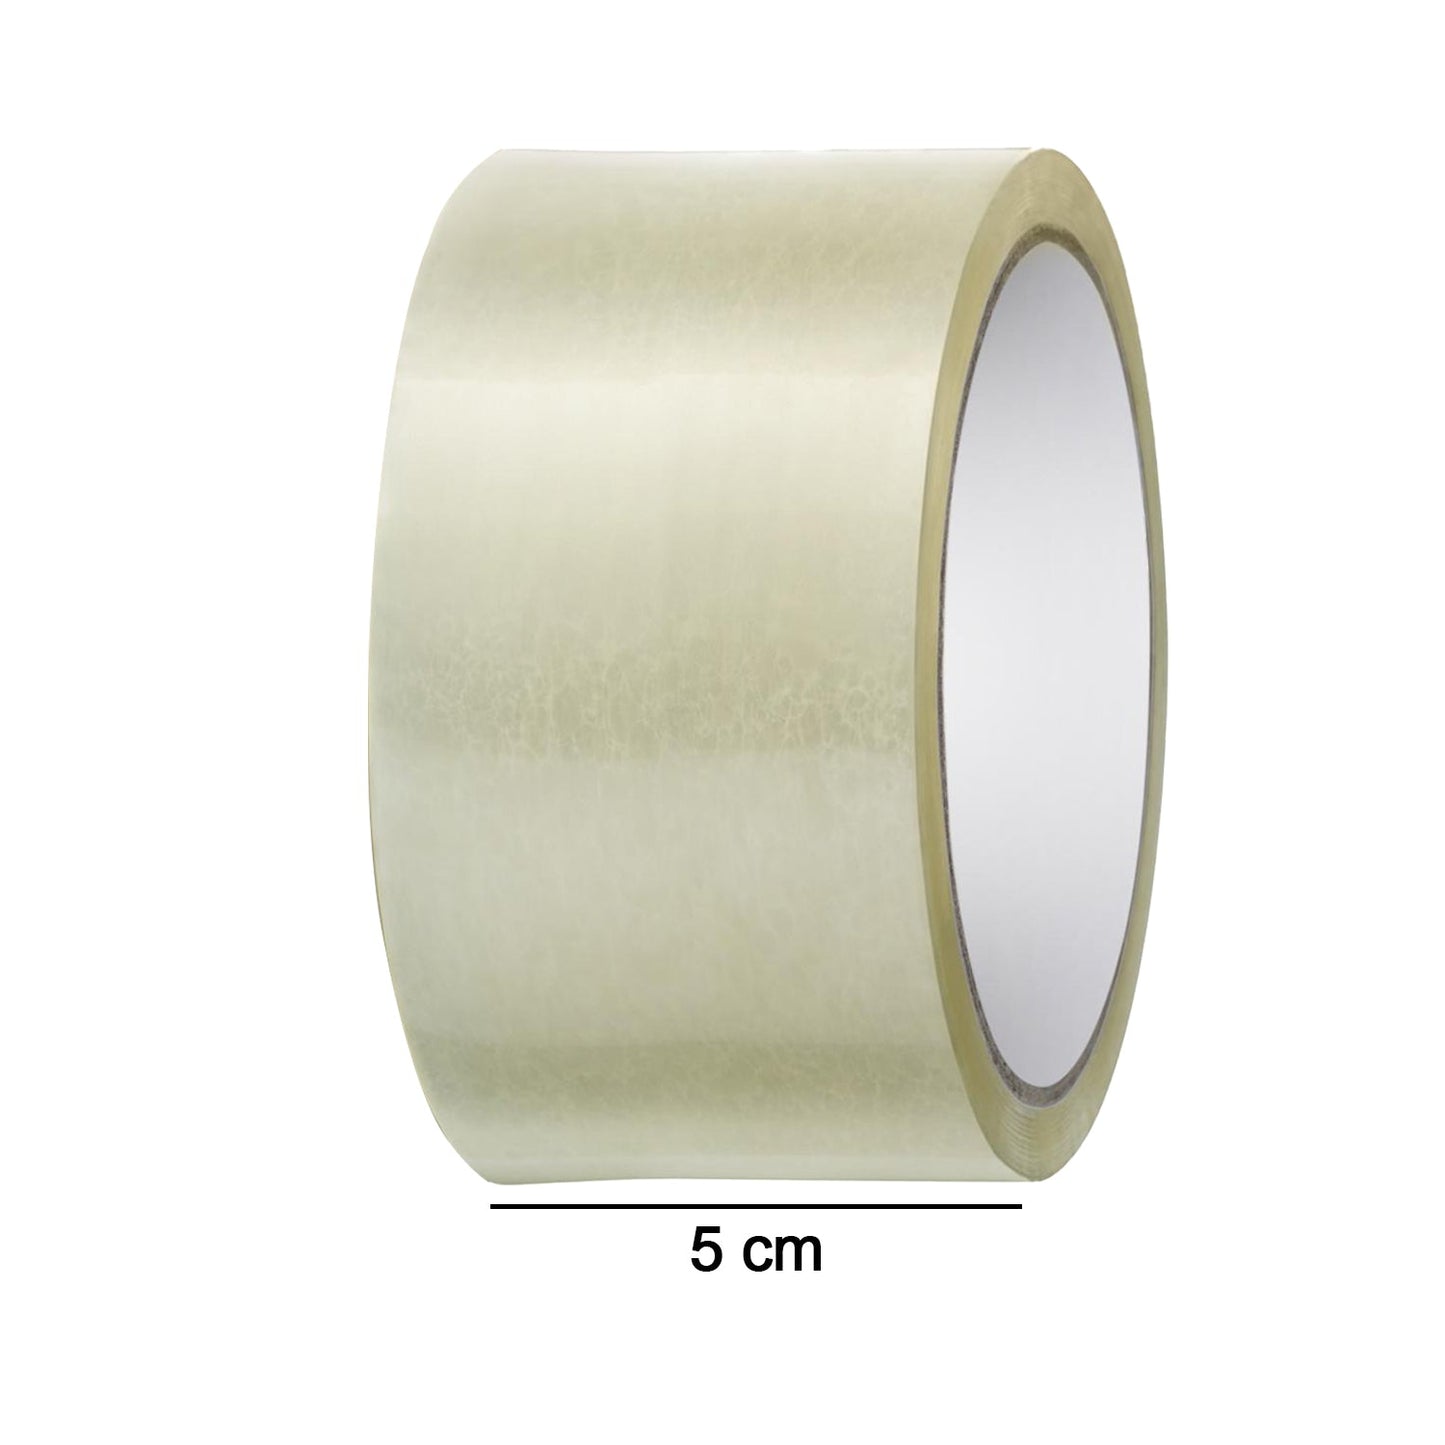 HIGH ADHESIVE TRANSPARENT TAPE FOR HOME PACKAGING. (120 meter)